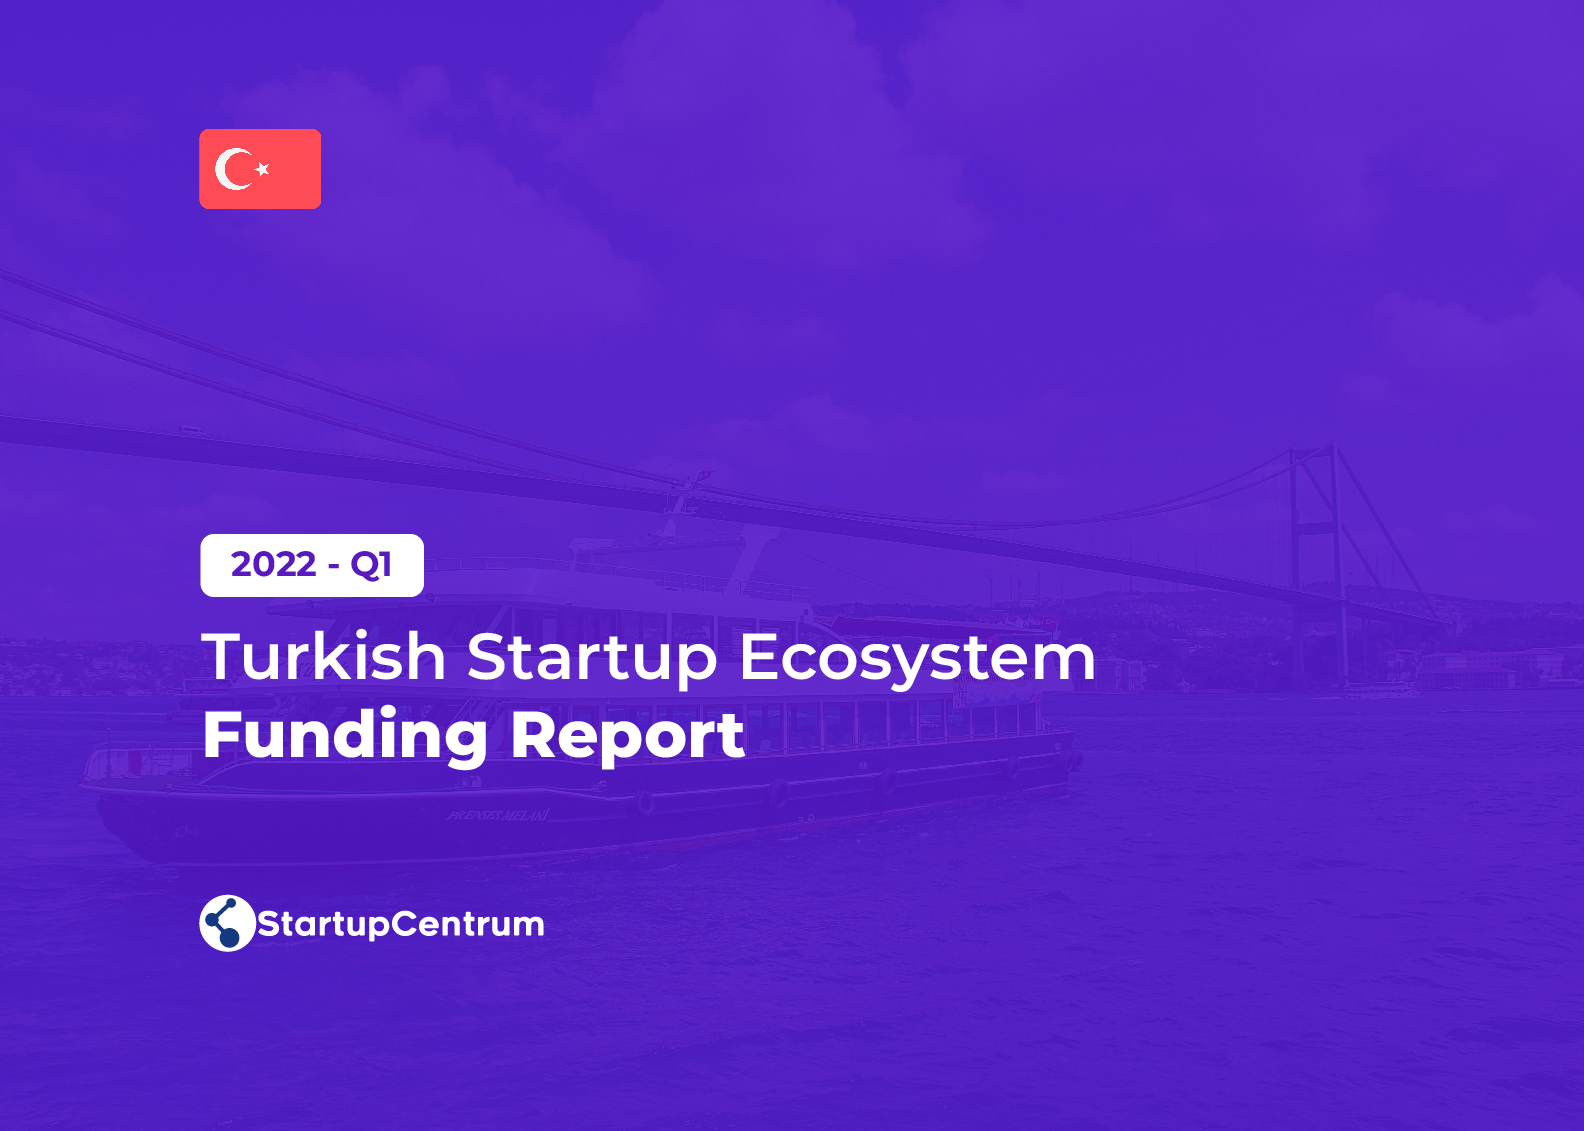 2022 - Q1 Turkish Startup Ecosystem Funding Report Cover Image